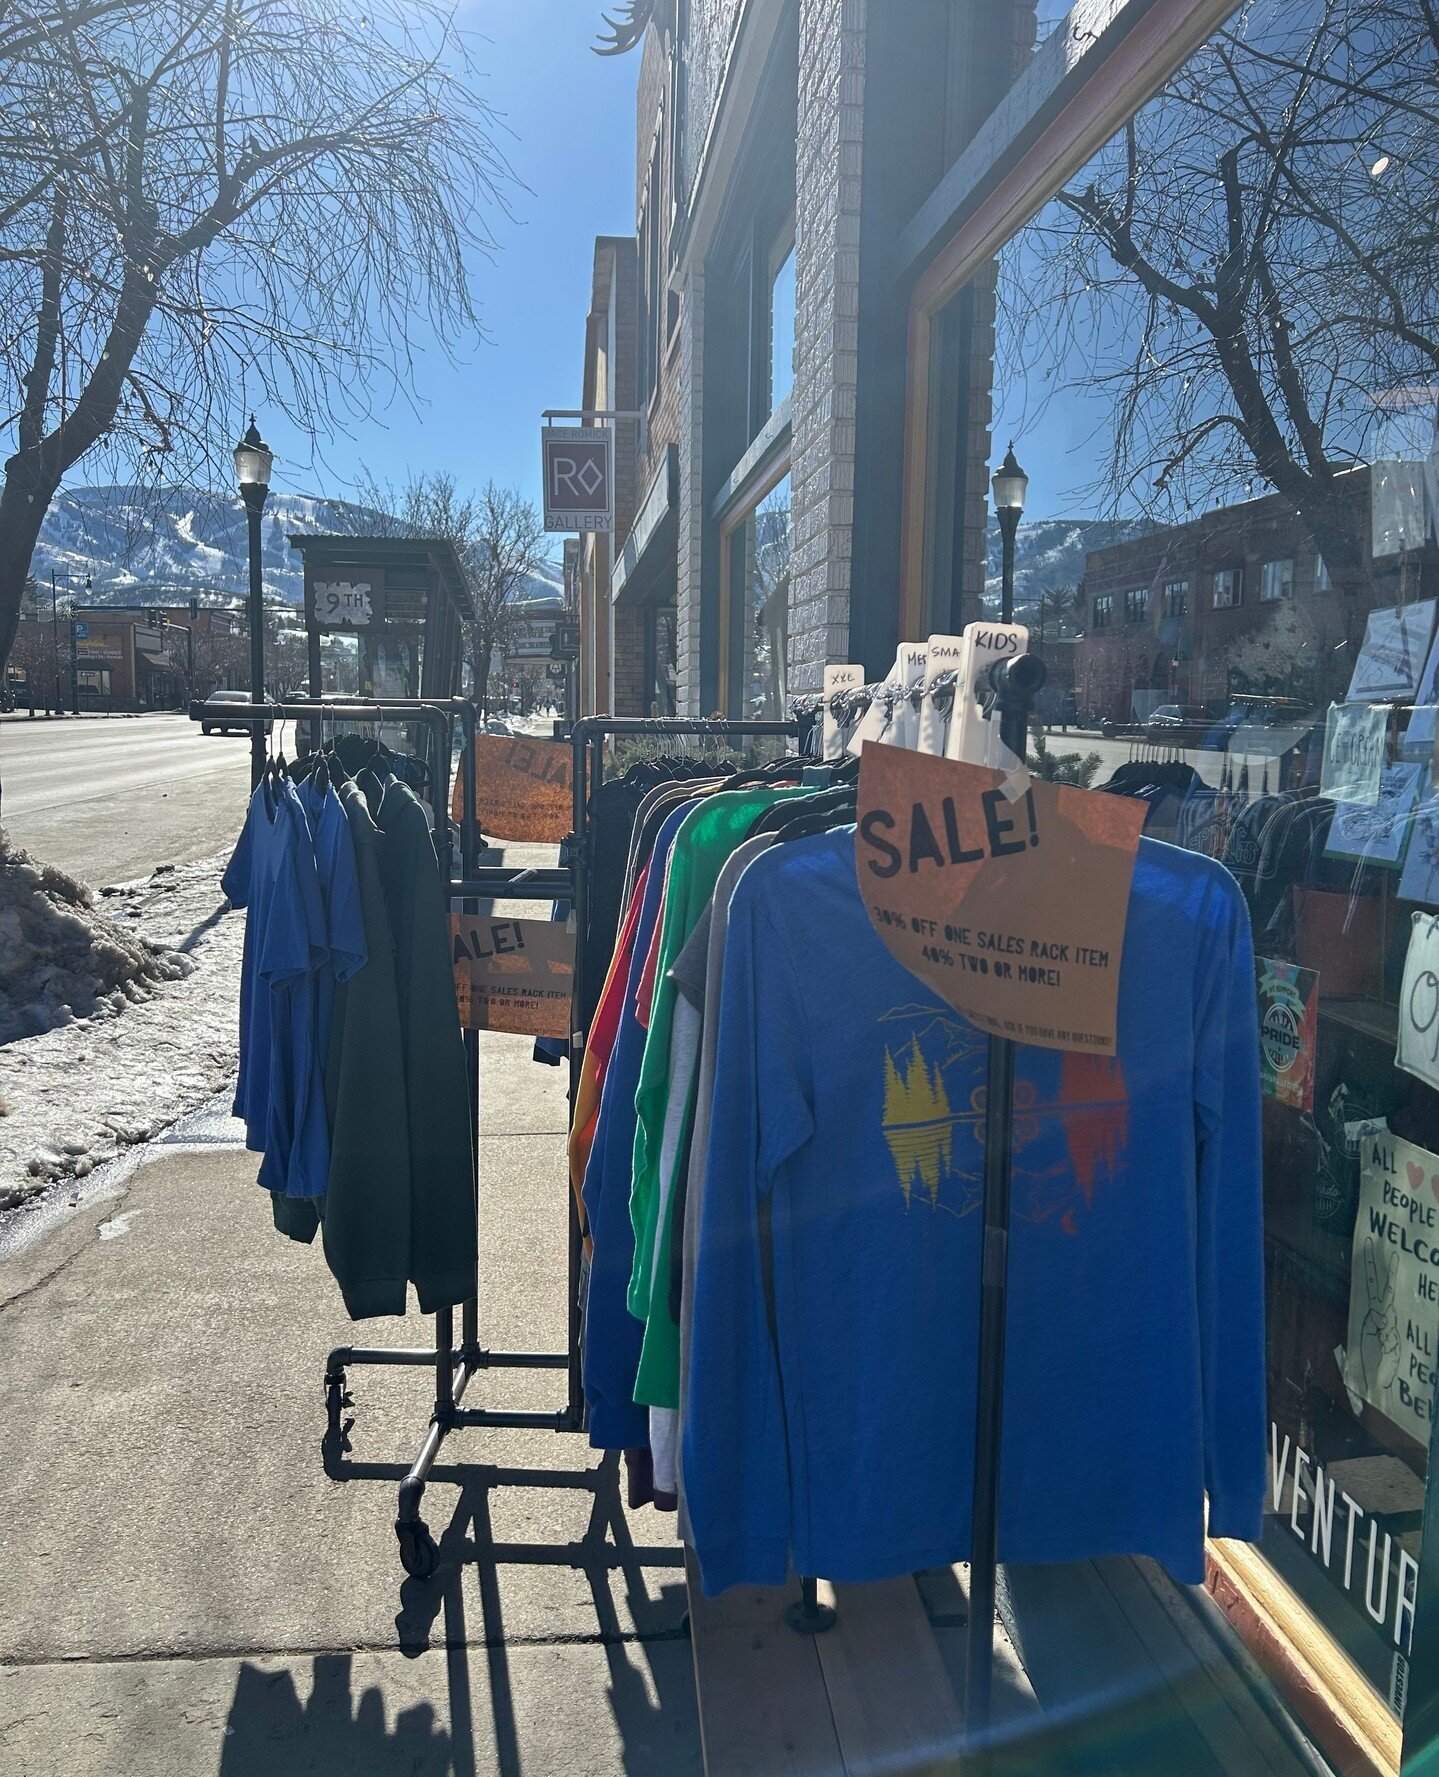 soak up that sunshine &amp; shop our sidewalk sale // open 10-8P all weekend 🌞⁠
-⁠
-⁠
-⁠
#steamboatsnaps #steamboat #visitcolorado #mountaintown #ski# #skivacation #shopsmall #shoplocal #shoplocalsteamboat #steamboatspringscolorado #smallbusiness #s